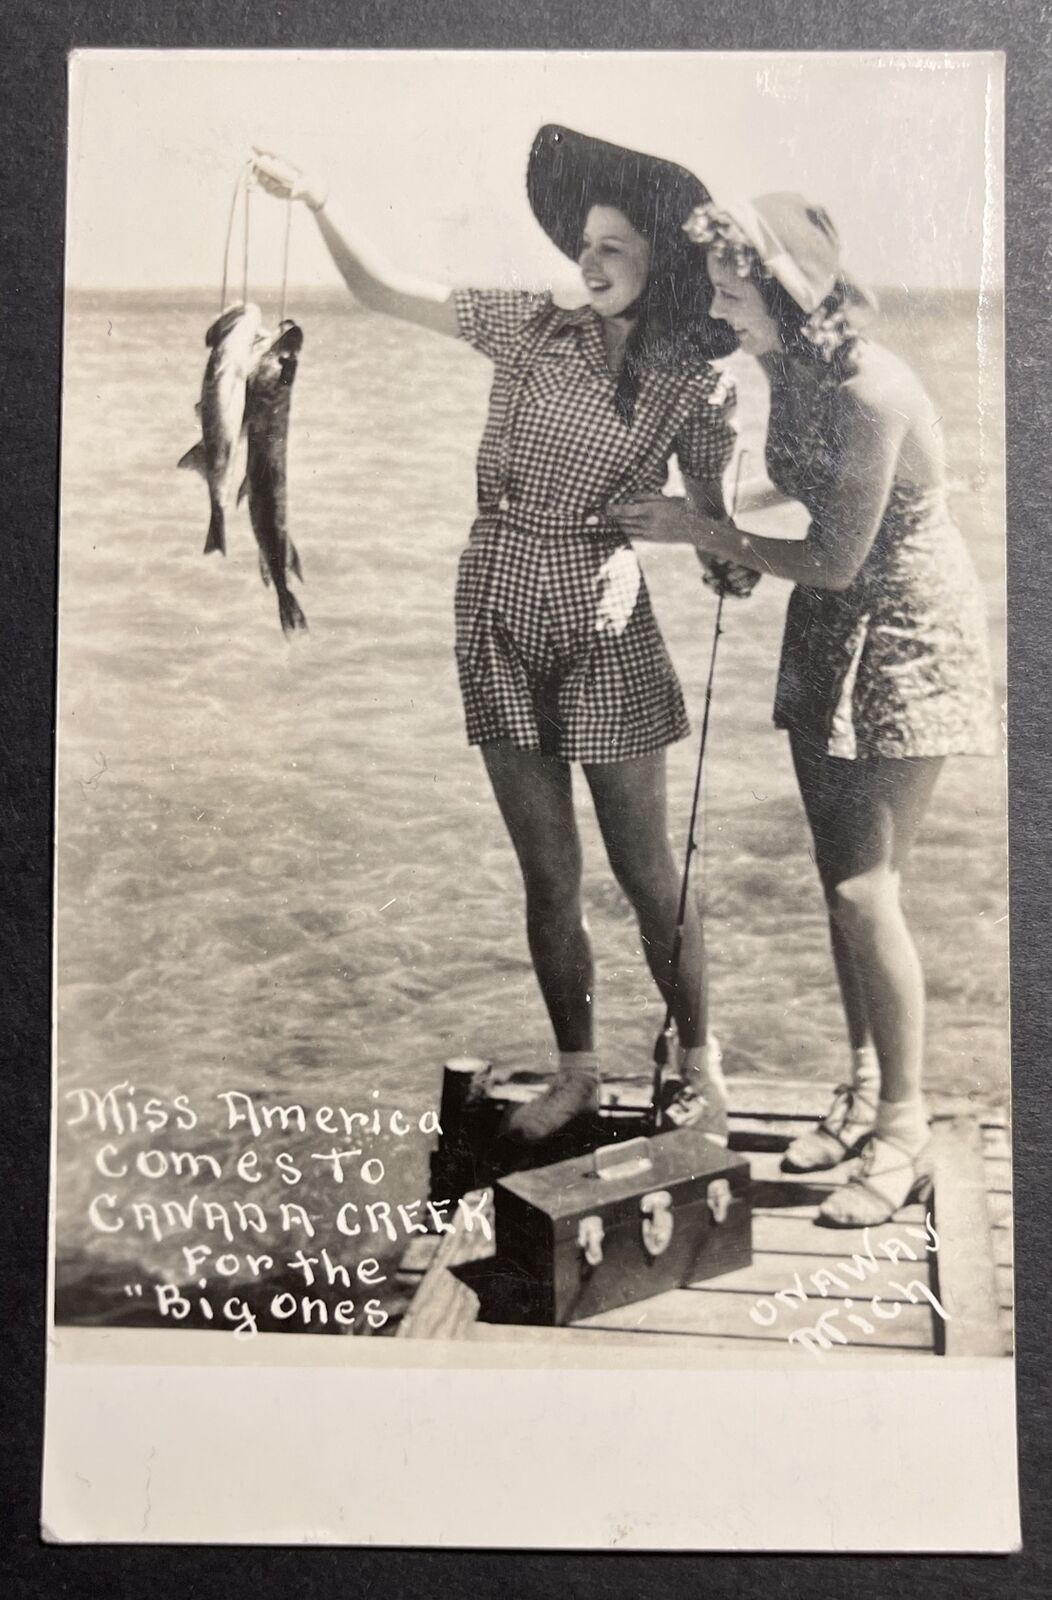 Miss America Comes to Canada Creek Onaway Michigan RPPC AZO For the Big Ones